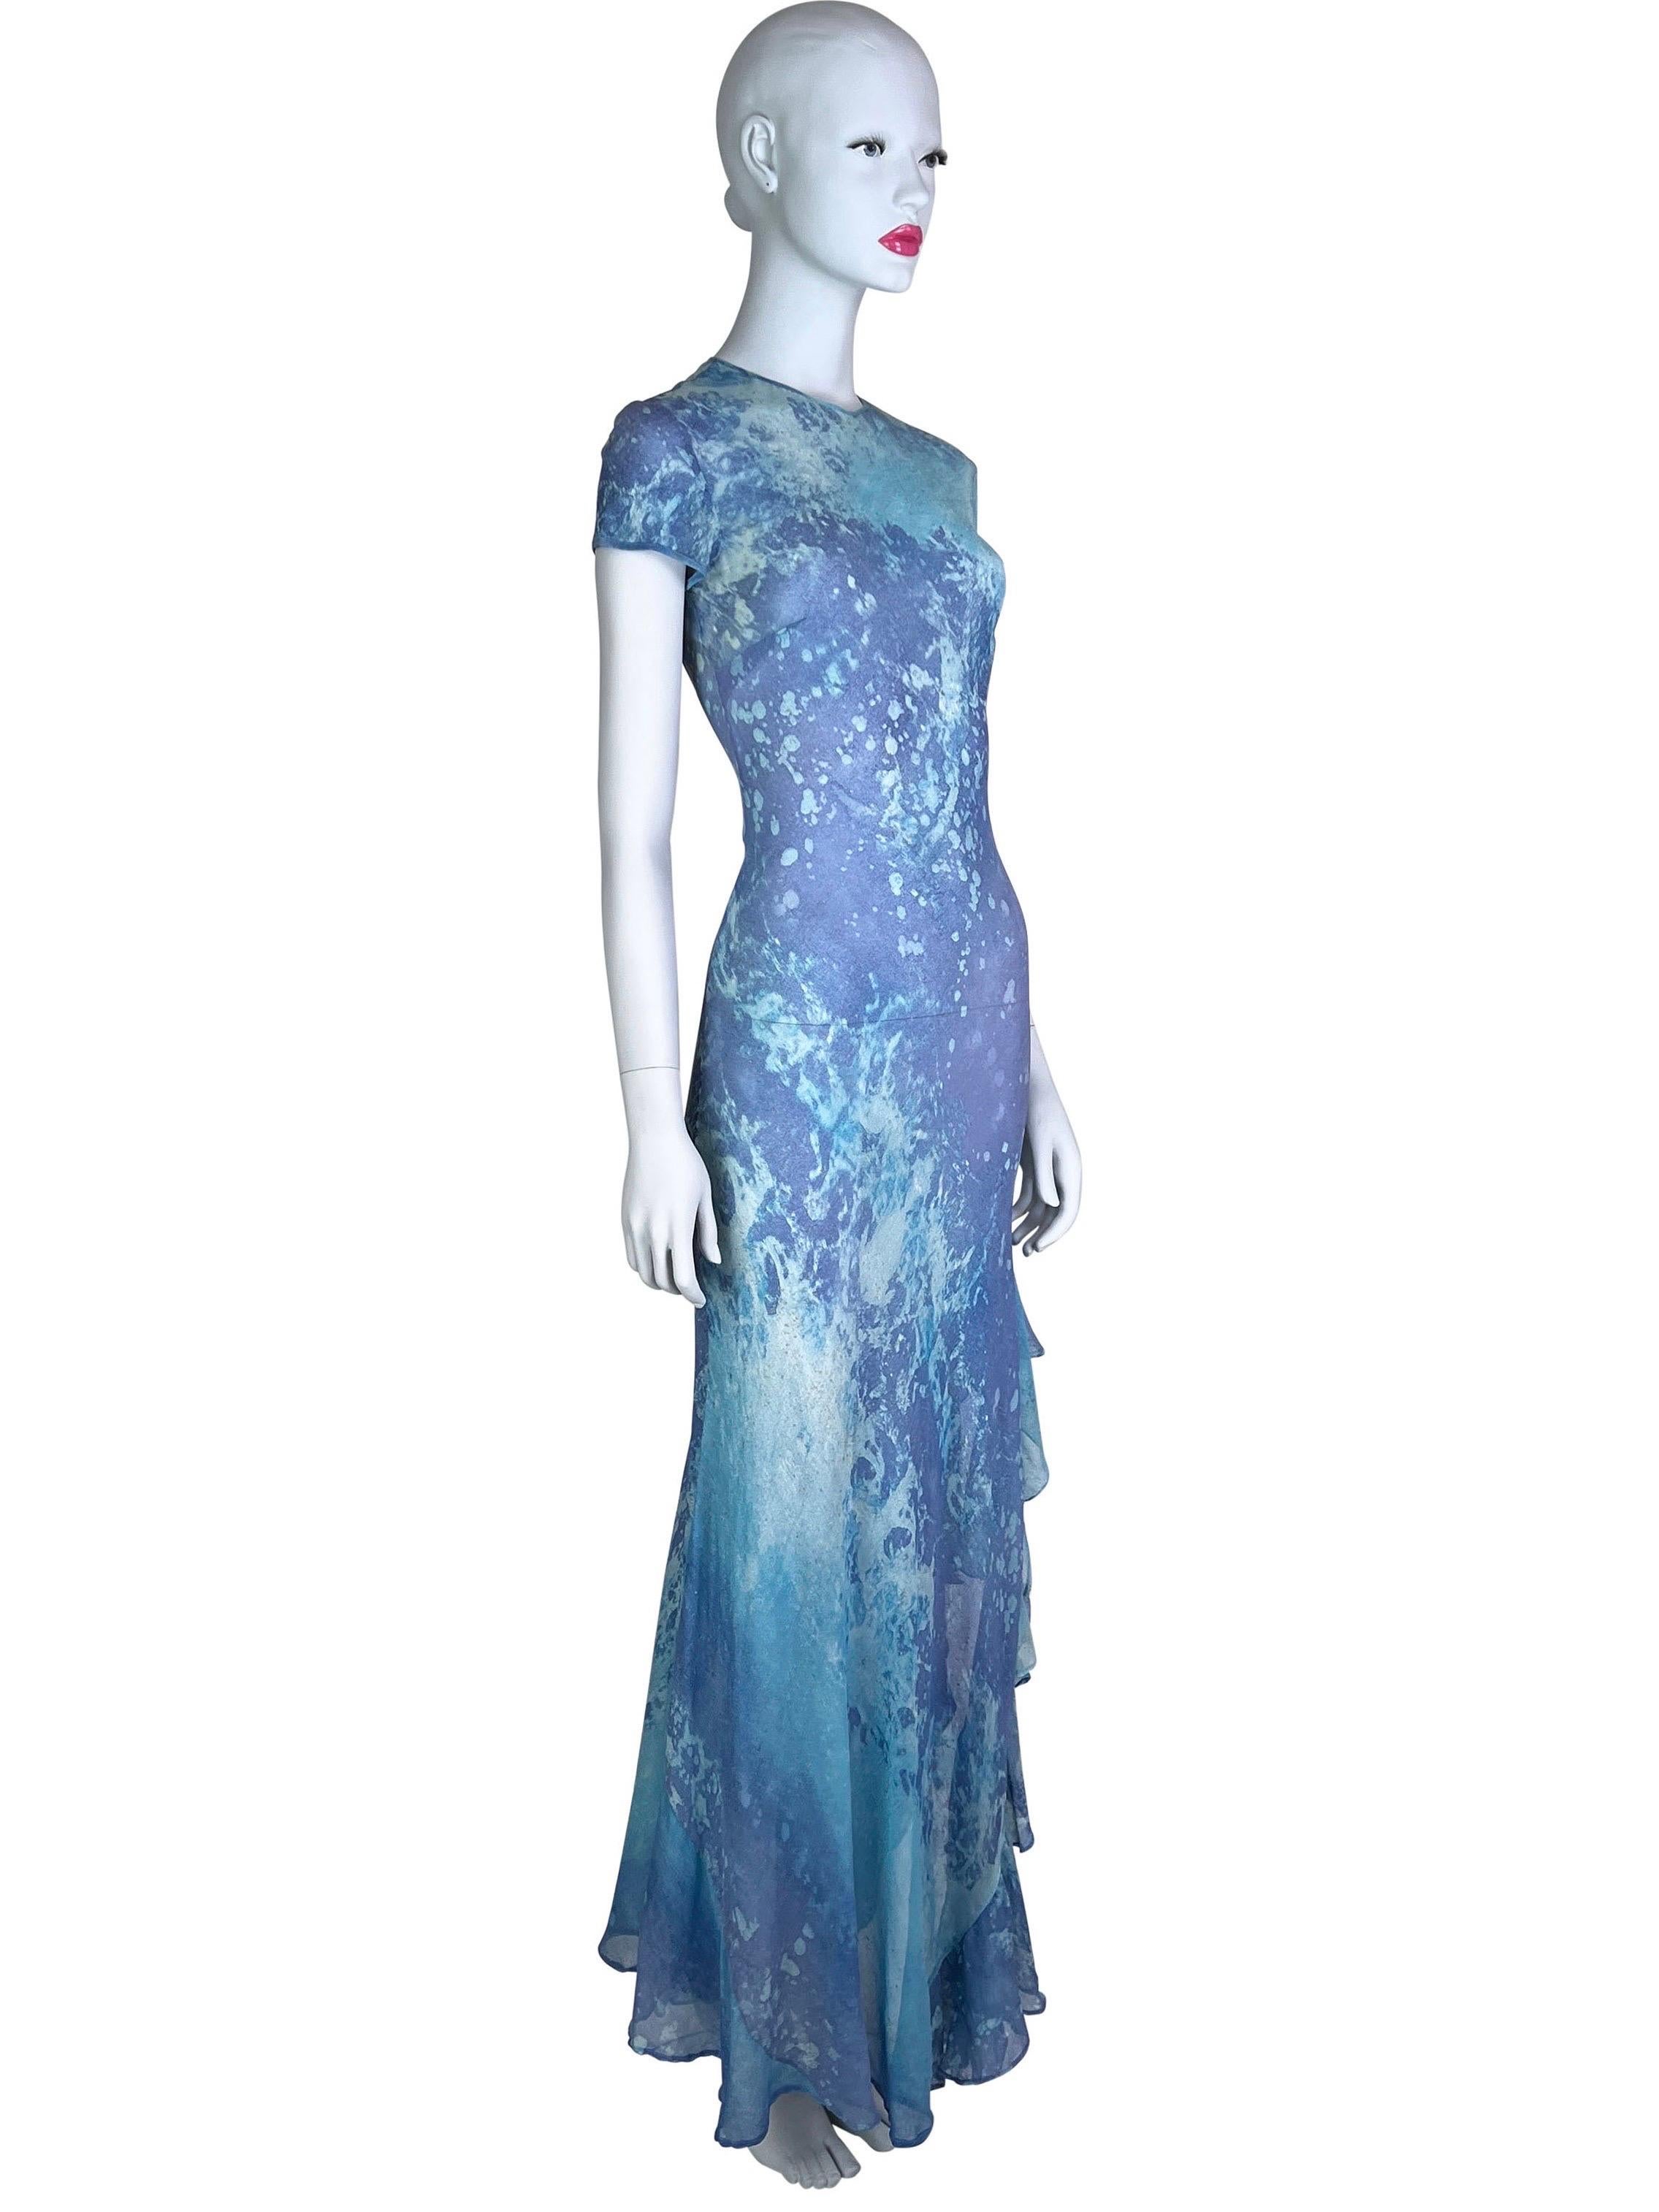 Spring 1999 Roberto Cavalli Watercolor Print Silk Gown For Sale 2